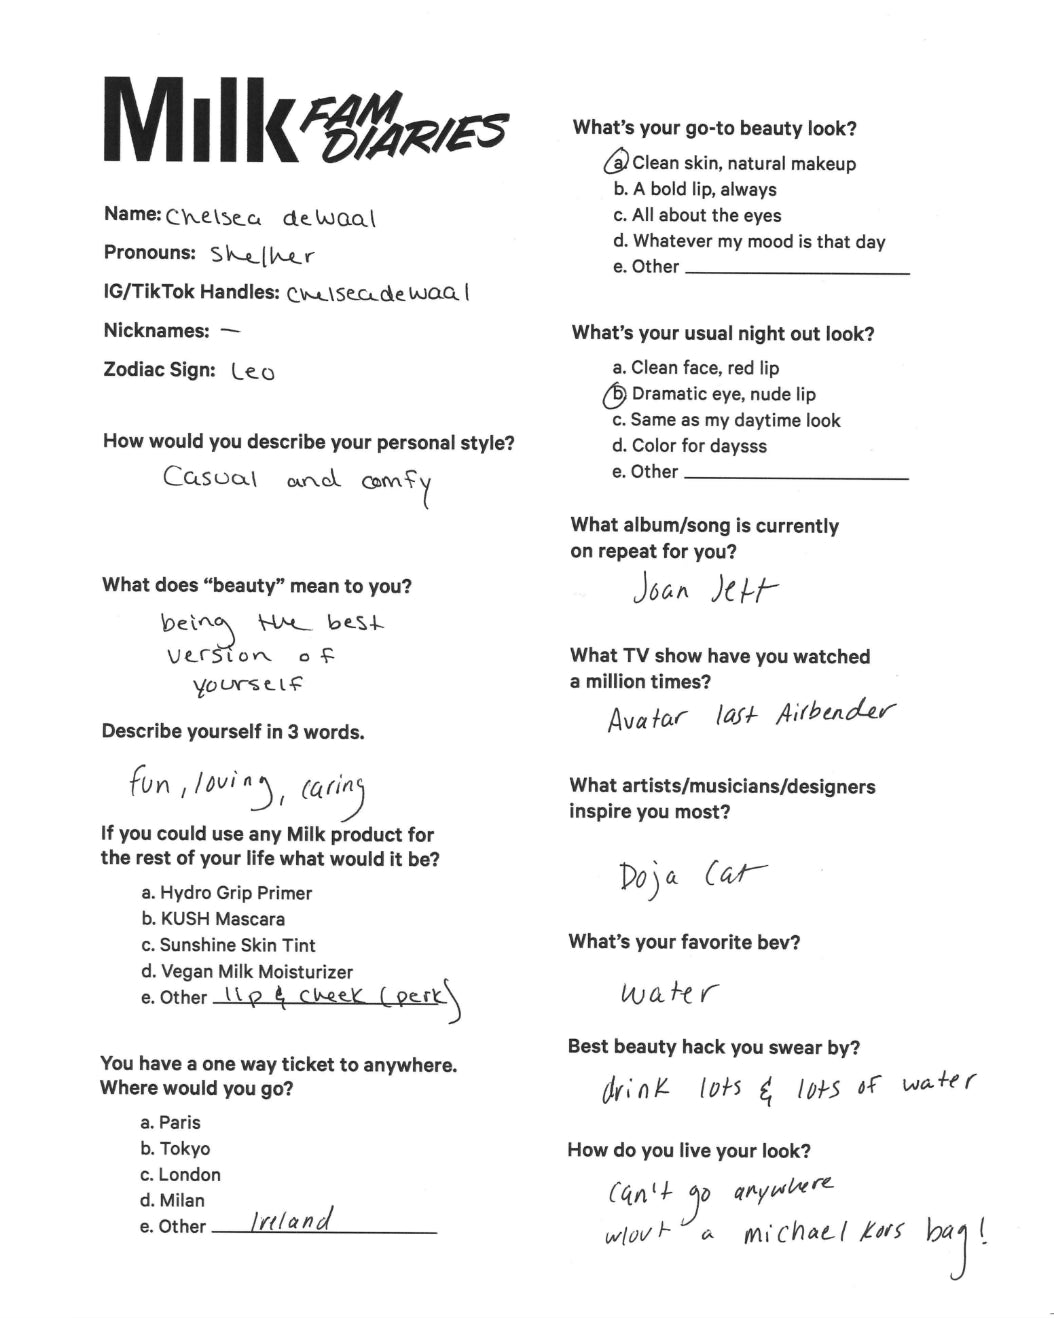 Survey filled out by Milk Makeup model Chelsea